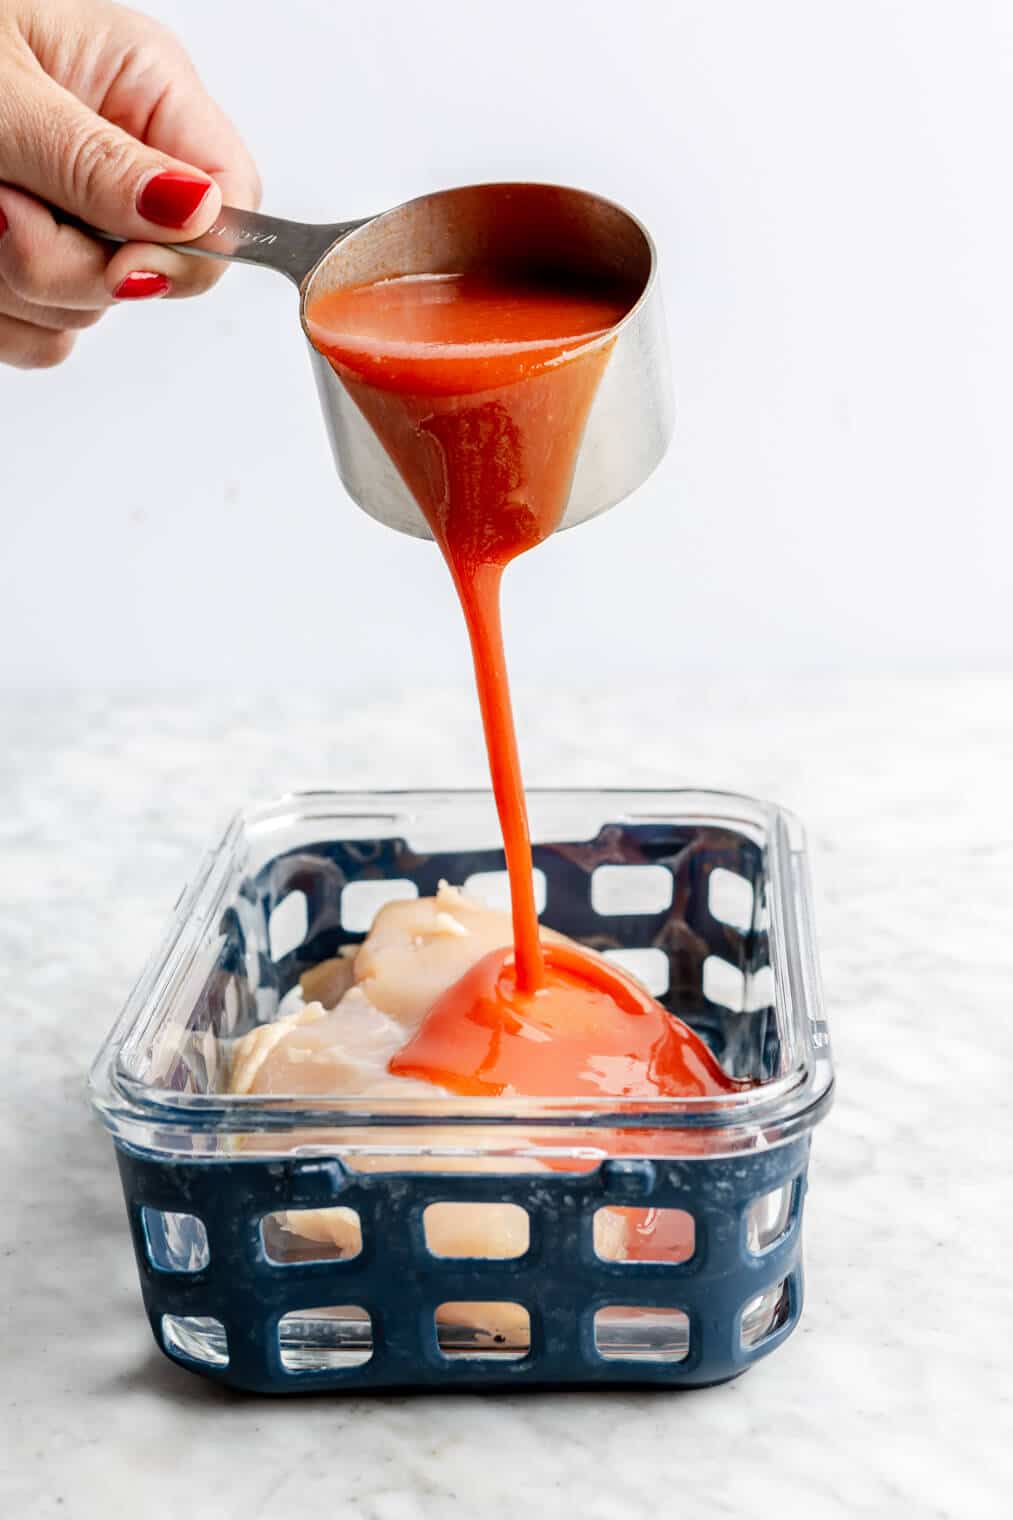 Hand holding a stainless steel measuring cup pouring hot sauce over a chicken breast in a glass container lined with blue netted silicone.